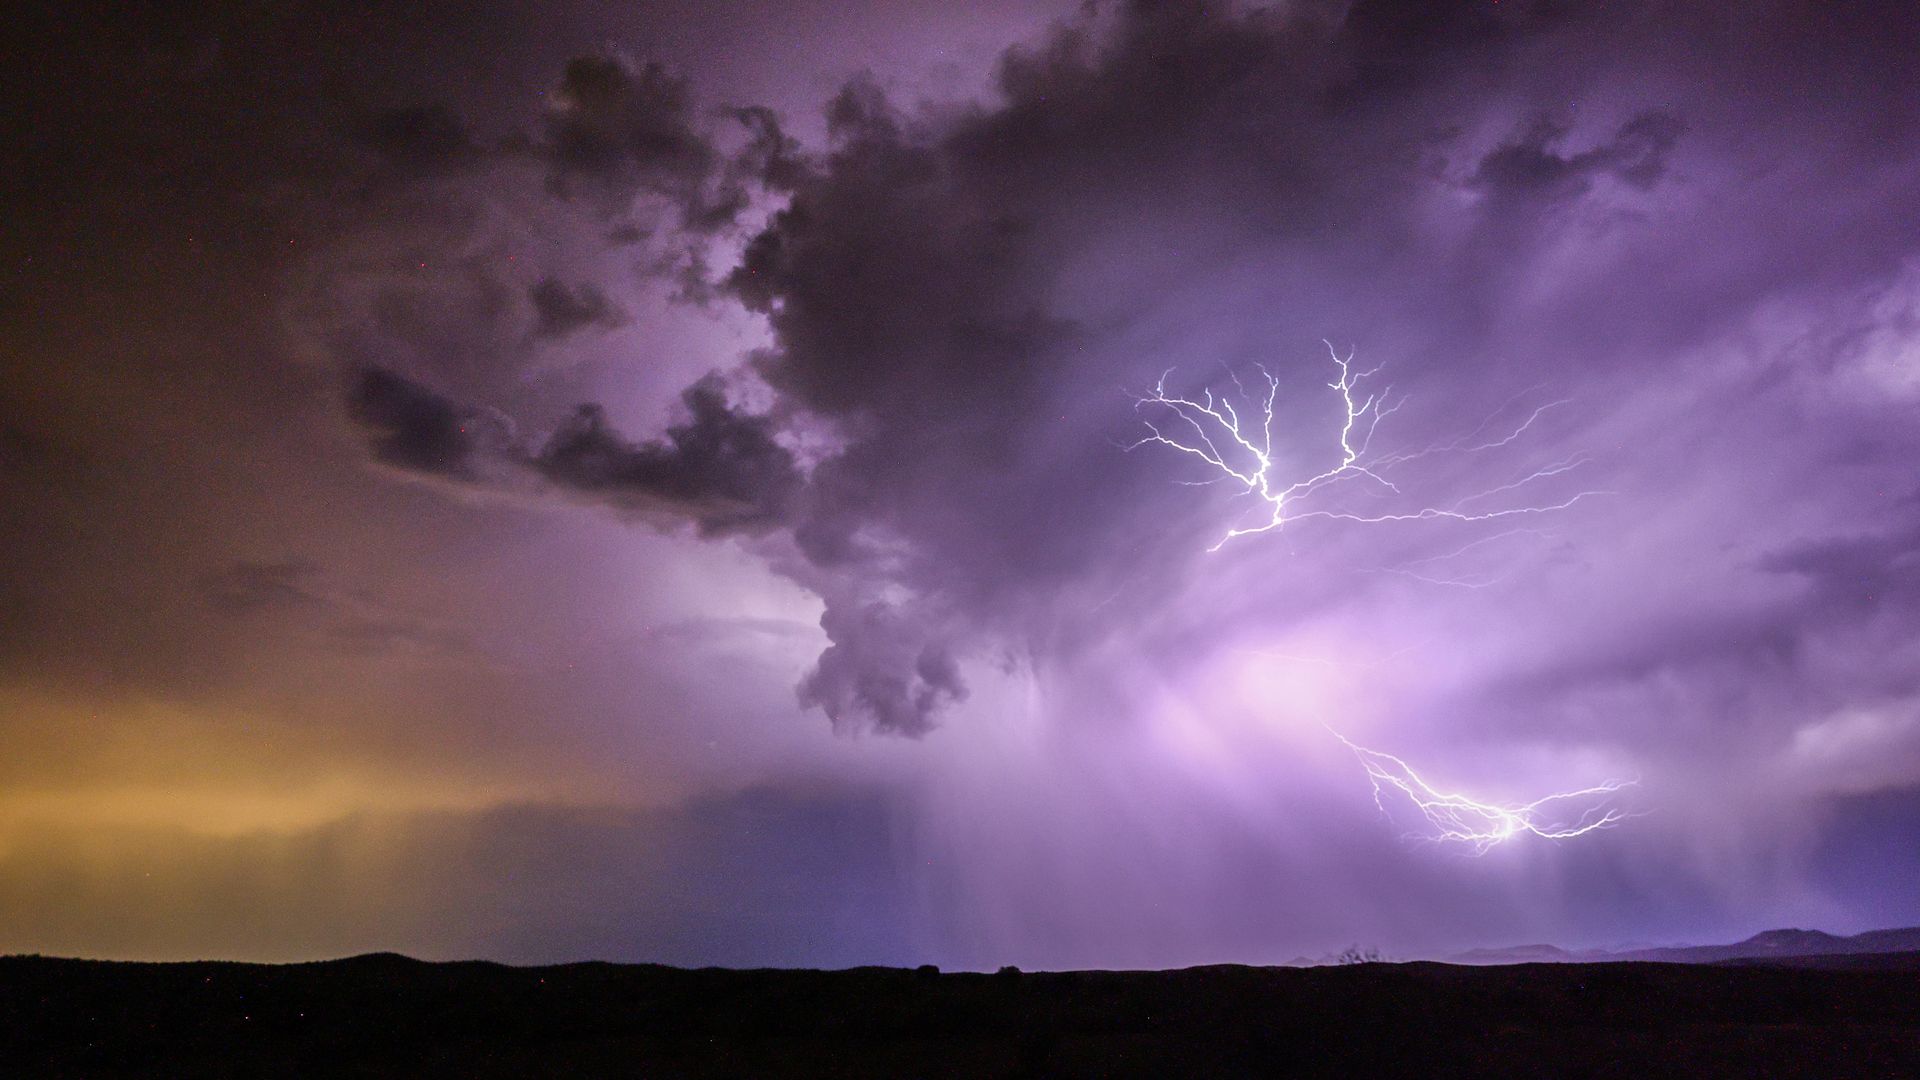 A thunderstorm with lightning flashes in the Southwest, U.S. at night.